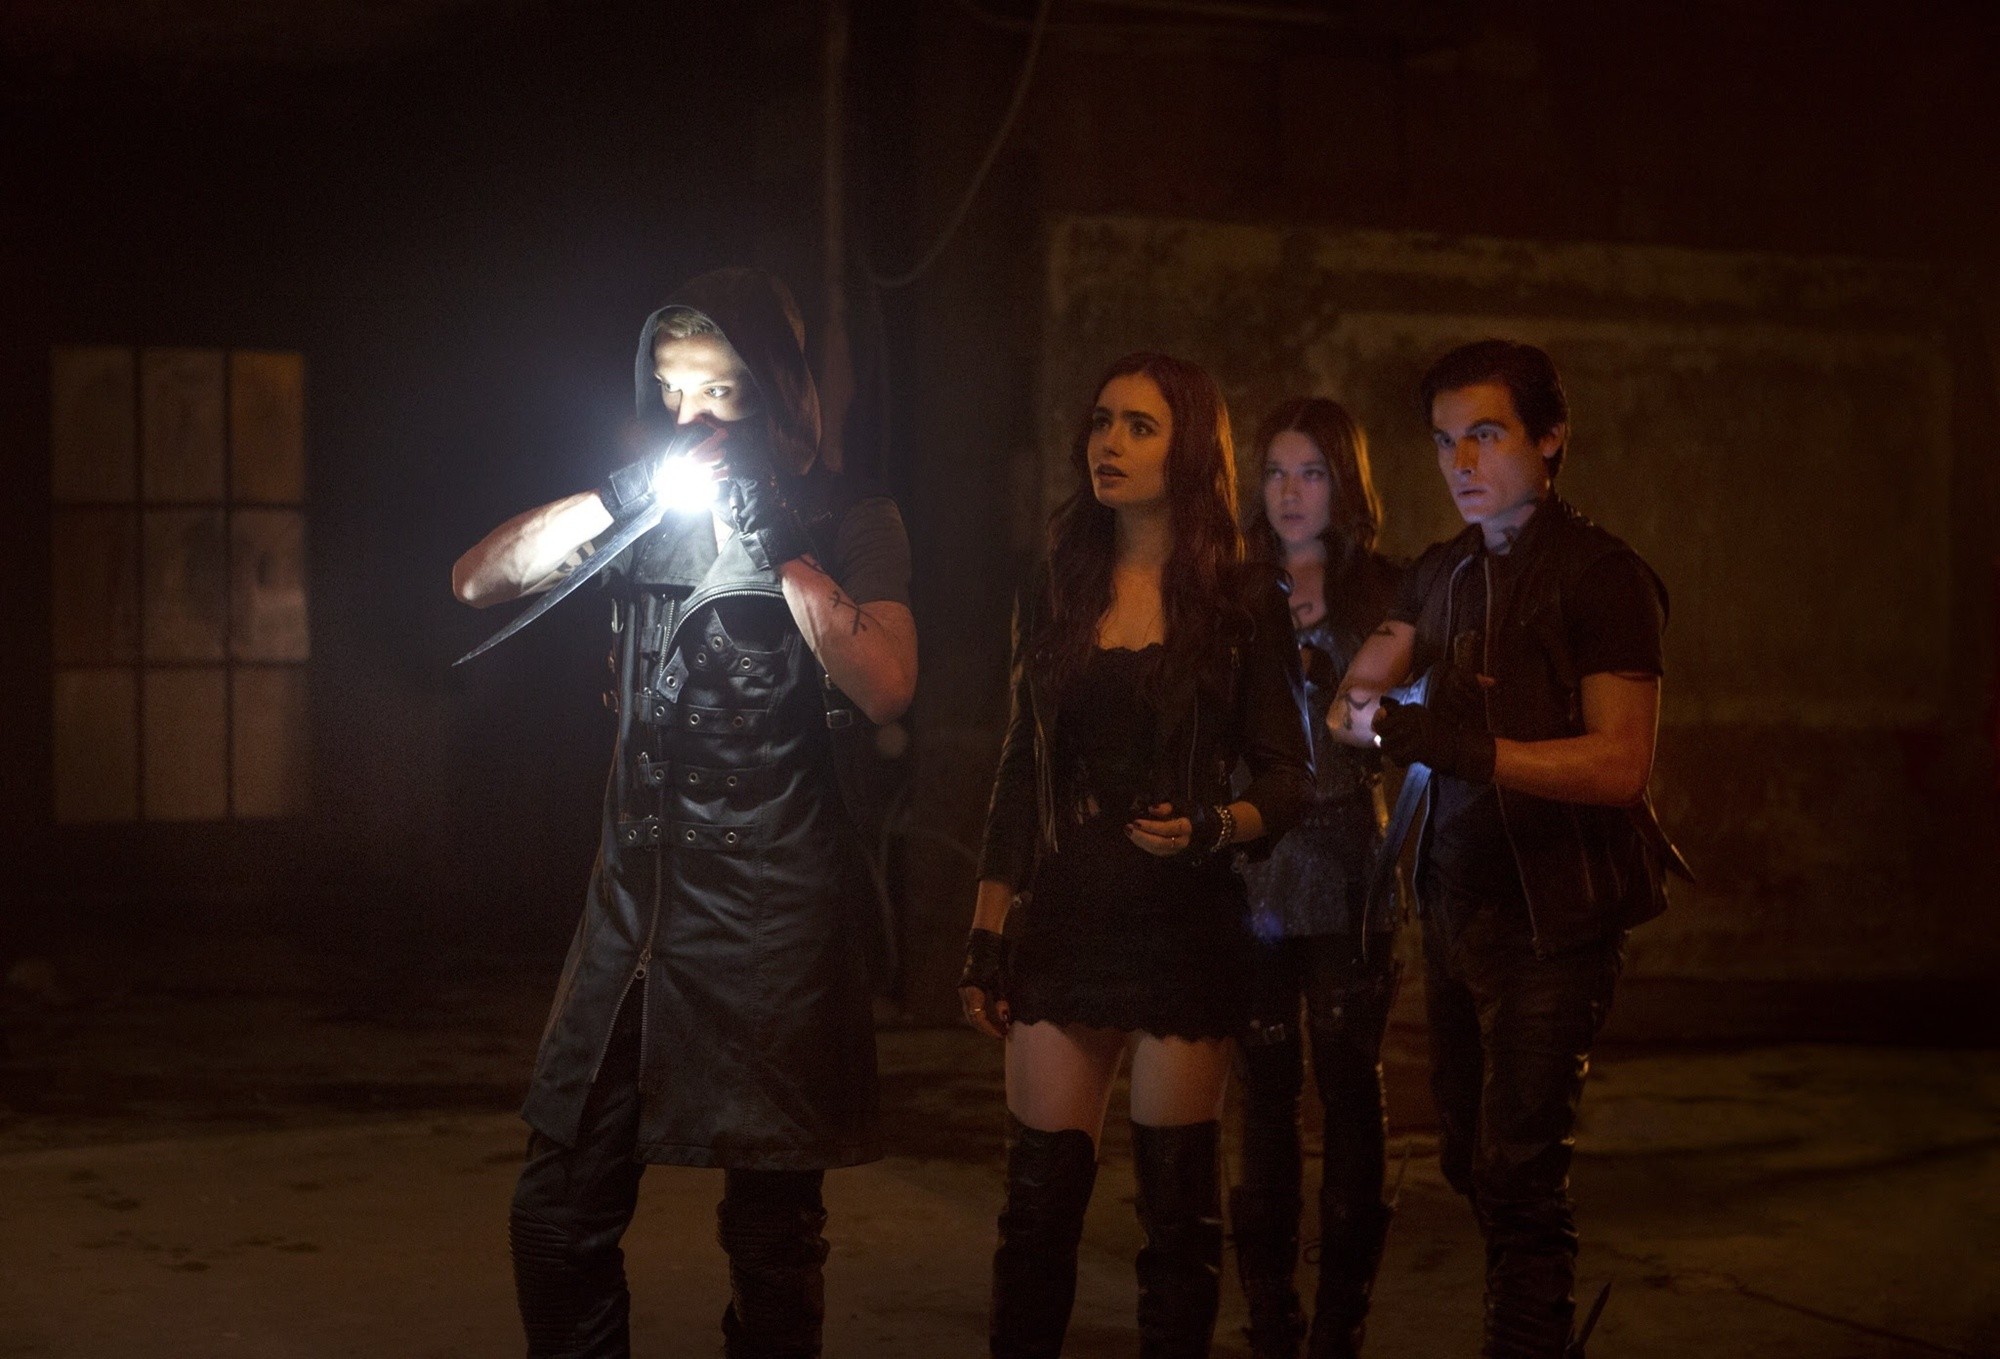 Jamie Campbell Bower, Lily Collins, Jemima West and Kevin Zegers in Screen Gems' The Mortal Instruments: City of Bones (2013). Photo credit by Rafy.